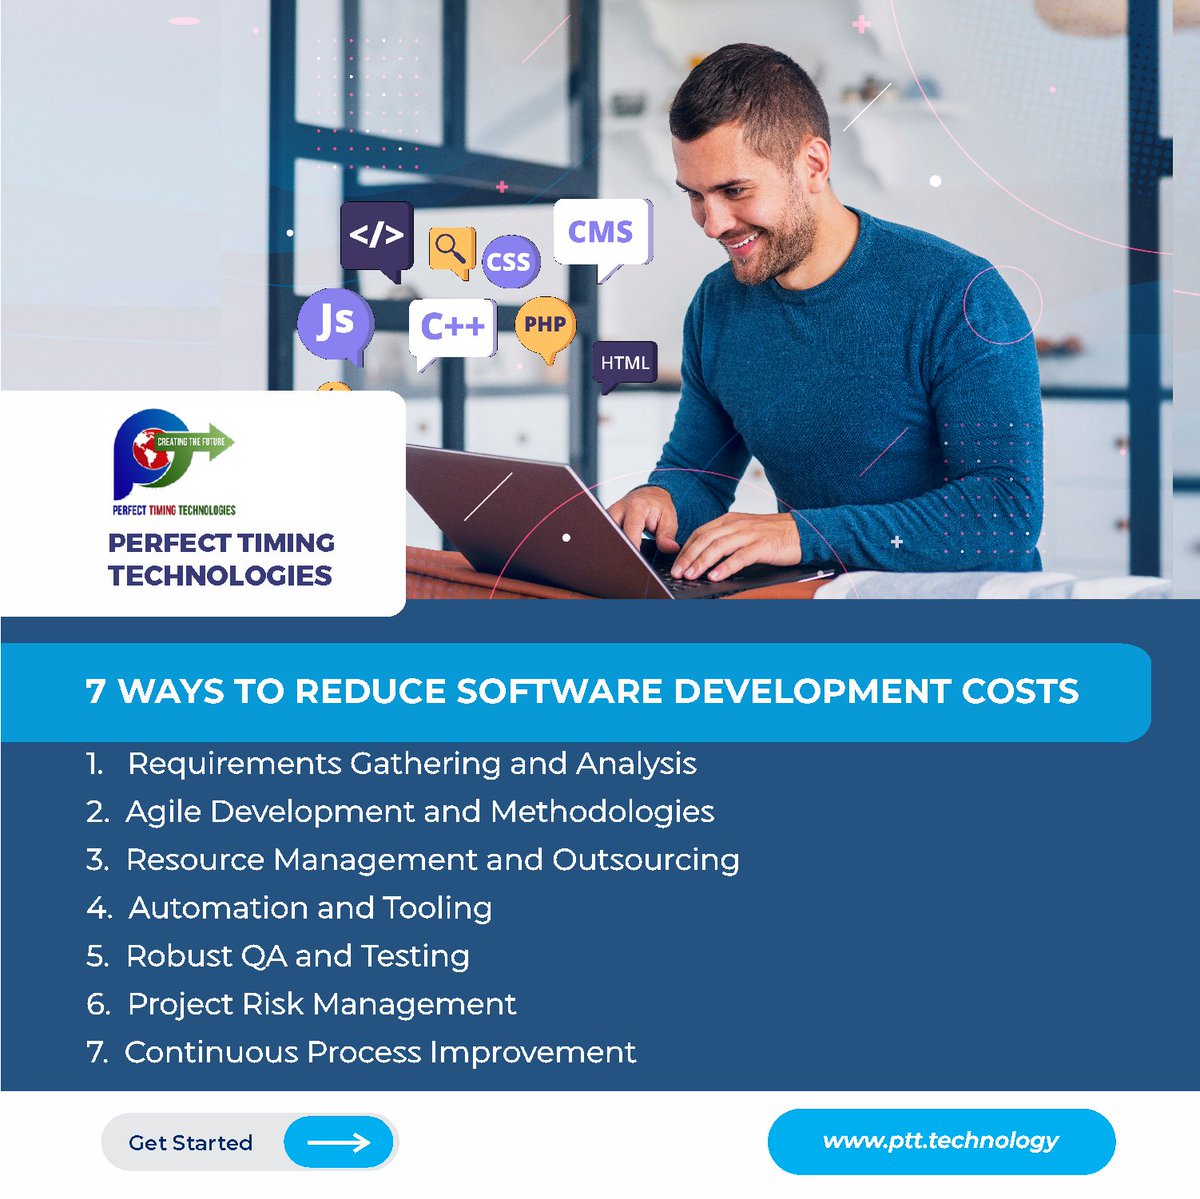 7 Ways to Reduce Software Development Costs

Read the full article at sam-solutions.com/blog/how-to-re… 

#SoftwareDevelopment #CostSavingTips #DevelopmentStrategies #TechSolutions #BudgetFriendlyTech #DevelopmentCosts #PerfectTimingTechnologies #TechEfficiency #BusinessSavings #Innovation